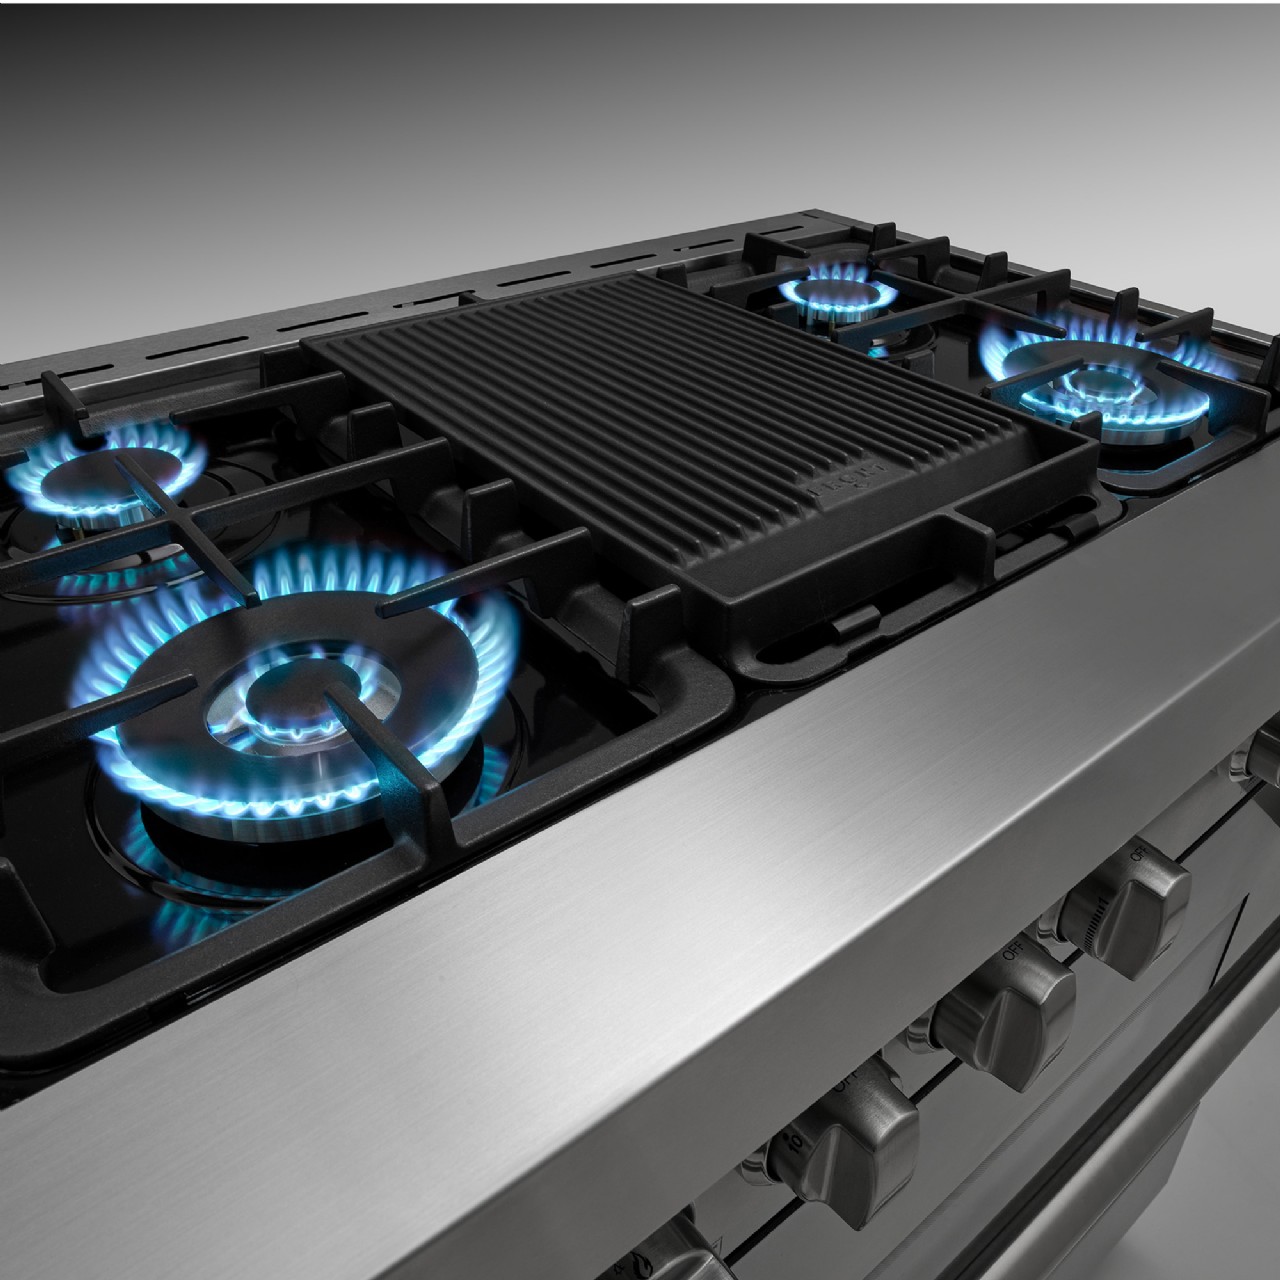 Tips for using a gas oven to prevent odors